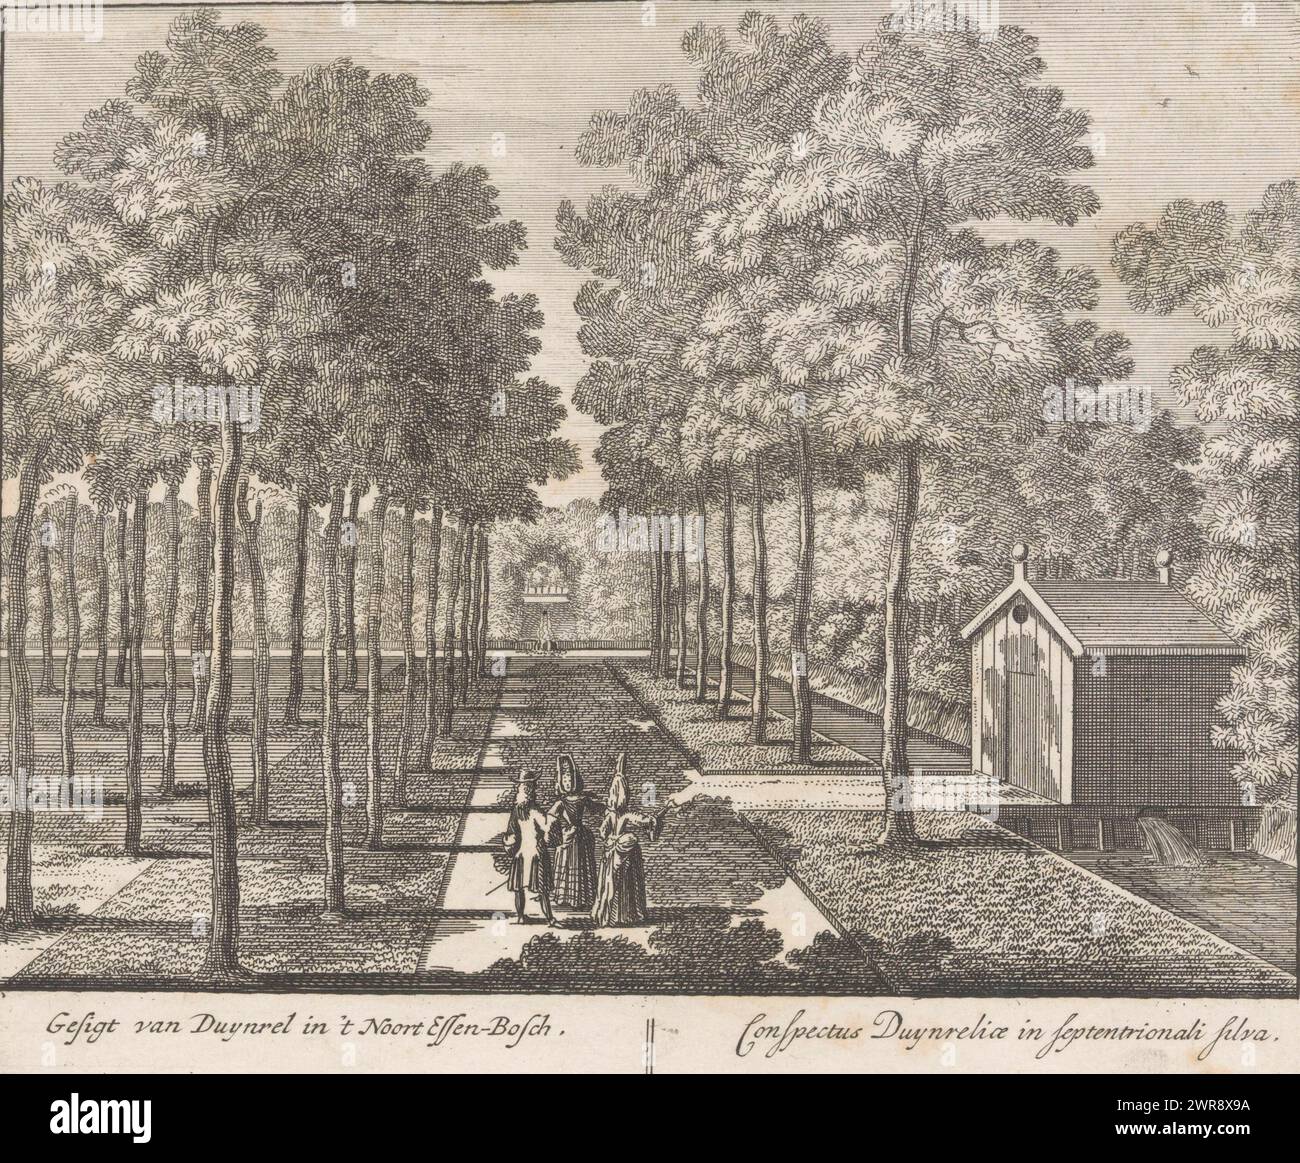 View of the ash forest of the Duinrell country estate, View of Duynrel in 't noort essen-bosch / Conspectus Duynreliae in septentrionali silva (title on object), Views of the Duinrell country estate (series title), View of the ash forest of the Duinrell country estate, with the path three walkers. Numbered bottom right: 15. Print from a series of sixteen prints by Duinrell., print maker: anonymous, publisher: Pieter Schenk (I), unknown, Amsterdam, 1675 - 1711, paper, etching, engraving, height 172 mm × width 202 mm, print Stock Photo